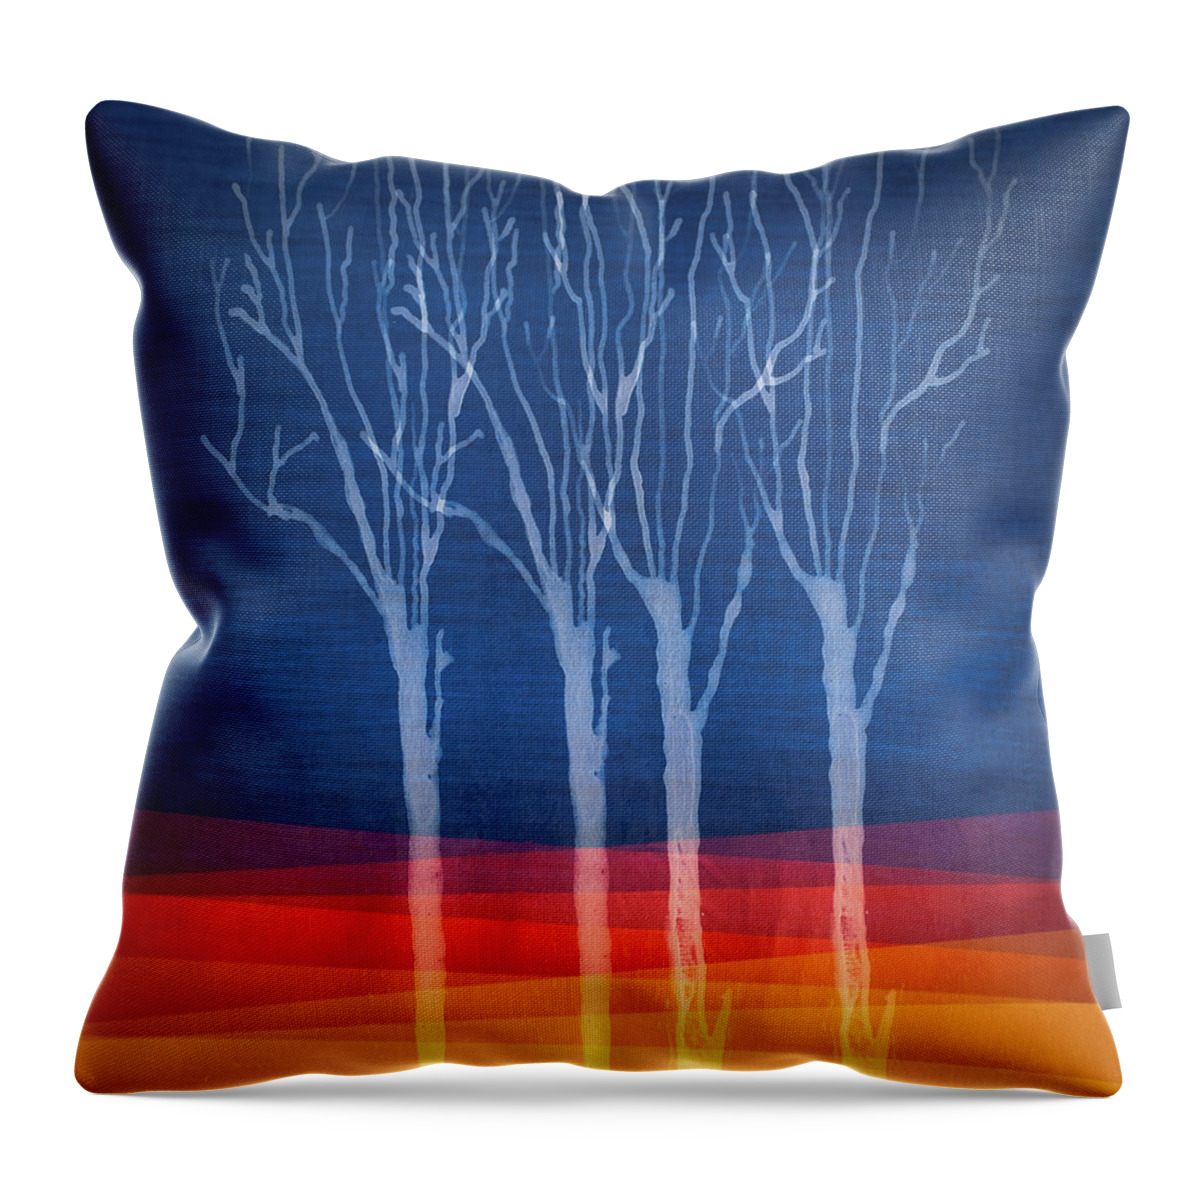 In A Row Throw Pillow featuring the digital art Drawing Of Trees by Michael Adendorff